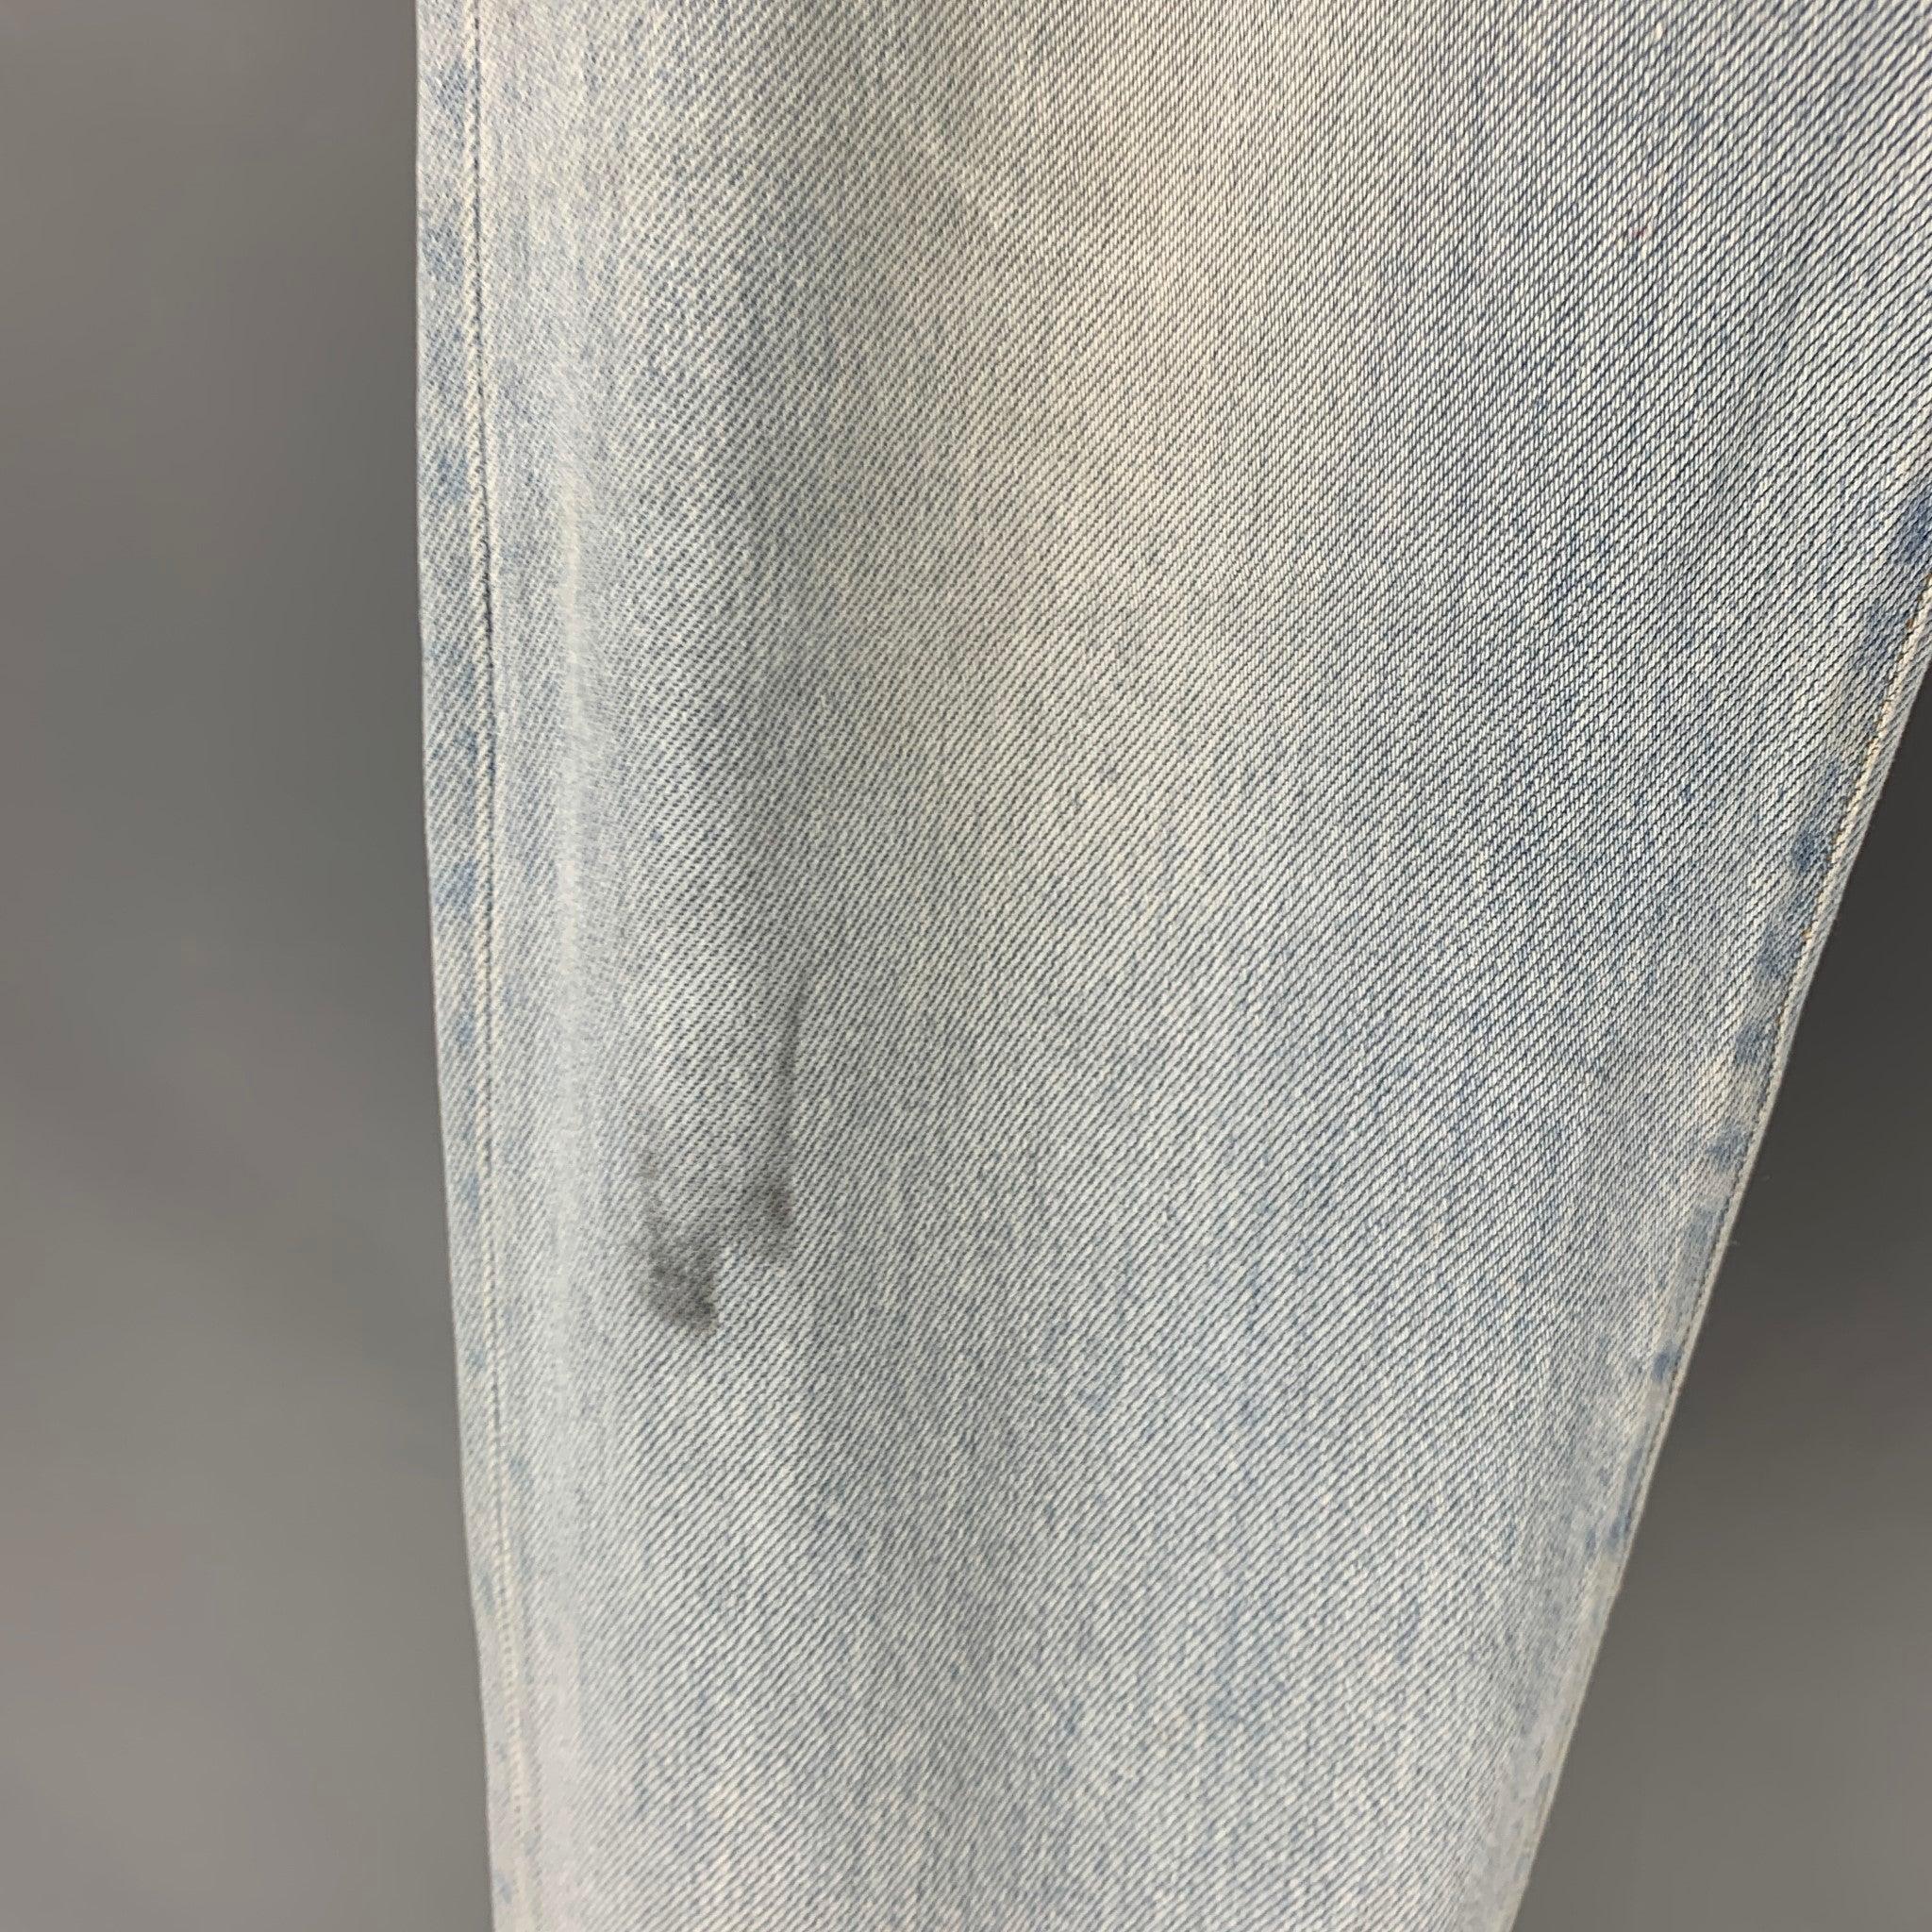 SAINT LAURENT Size 33 Light Blue Cotton Elastane Button Fly Jeans In Good Condition For Sale In San Francisco, CA